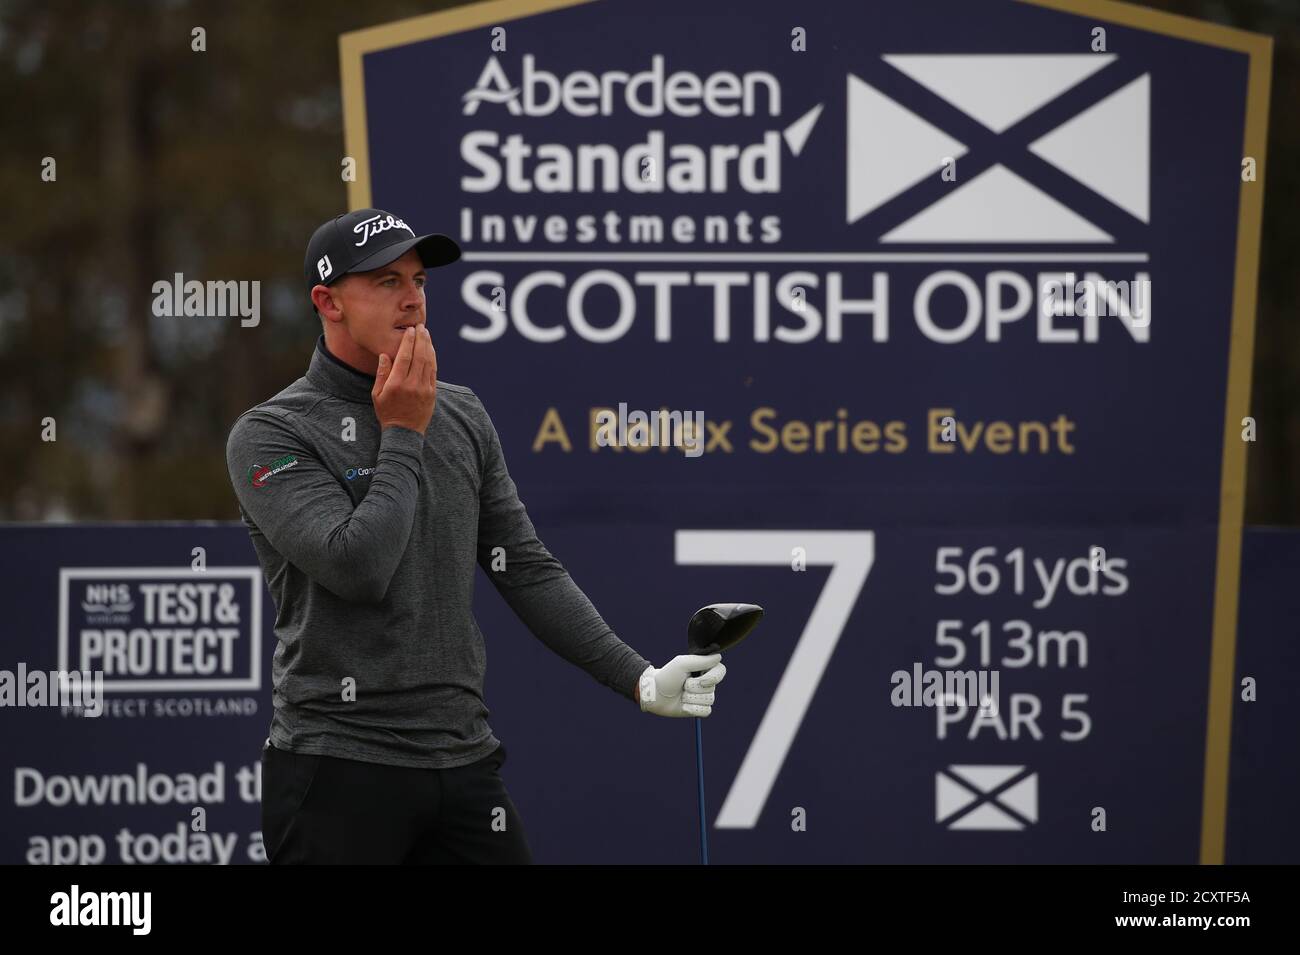 Scotland's Grant Forrest during the first round of the Aberdeen Standard Investments Scottish Open at the The Renaissance Club, North Berwick. Stock Photo